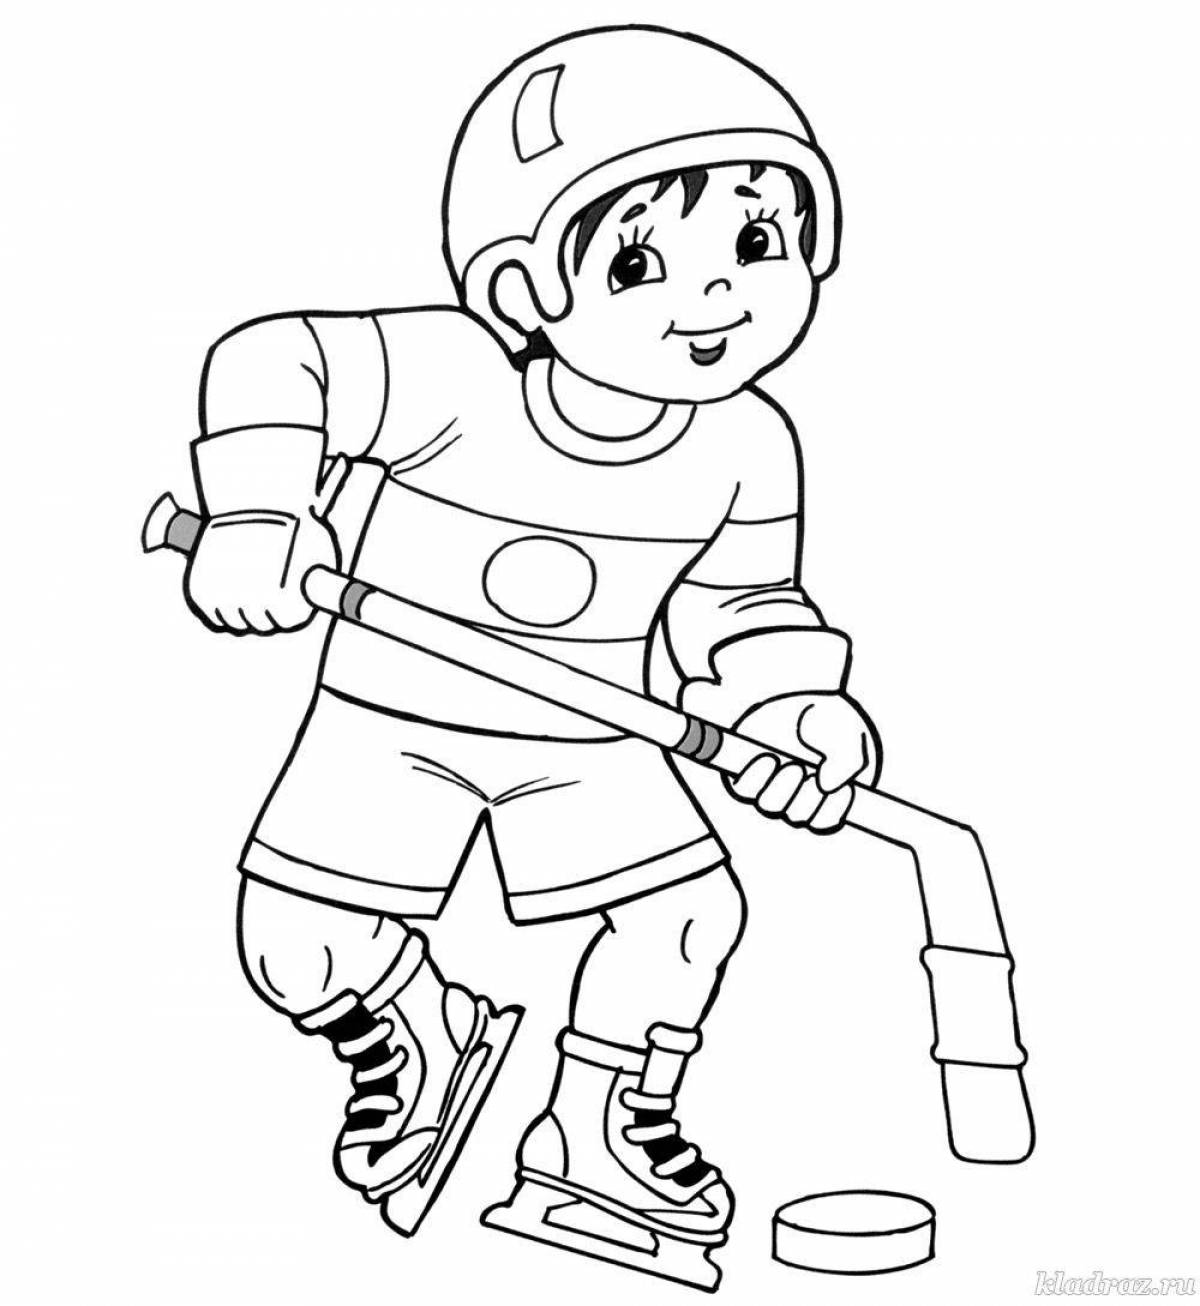 Color-explosive winter sports coloring page